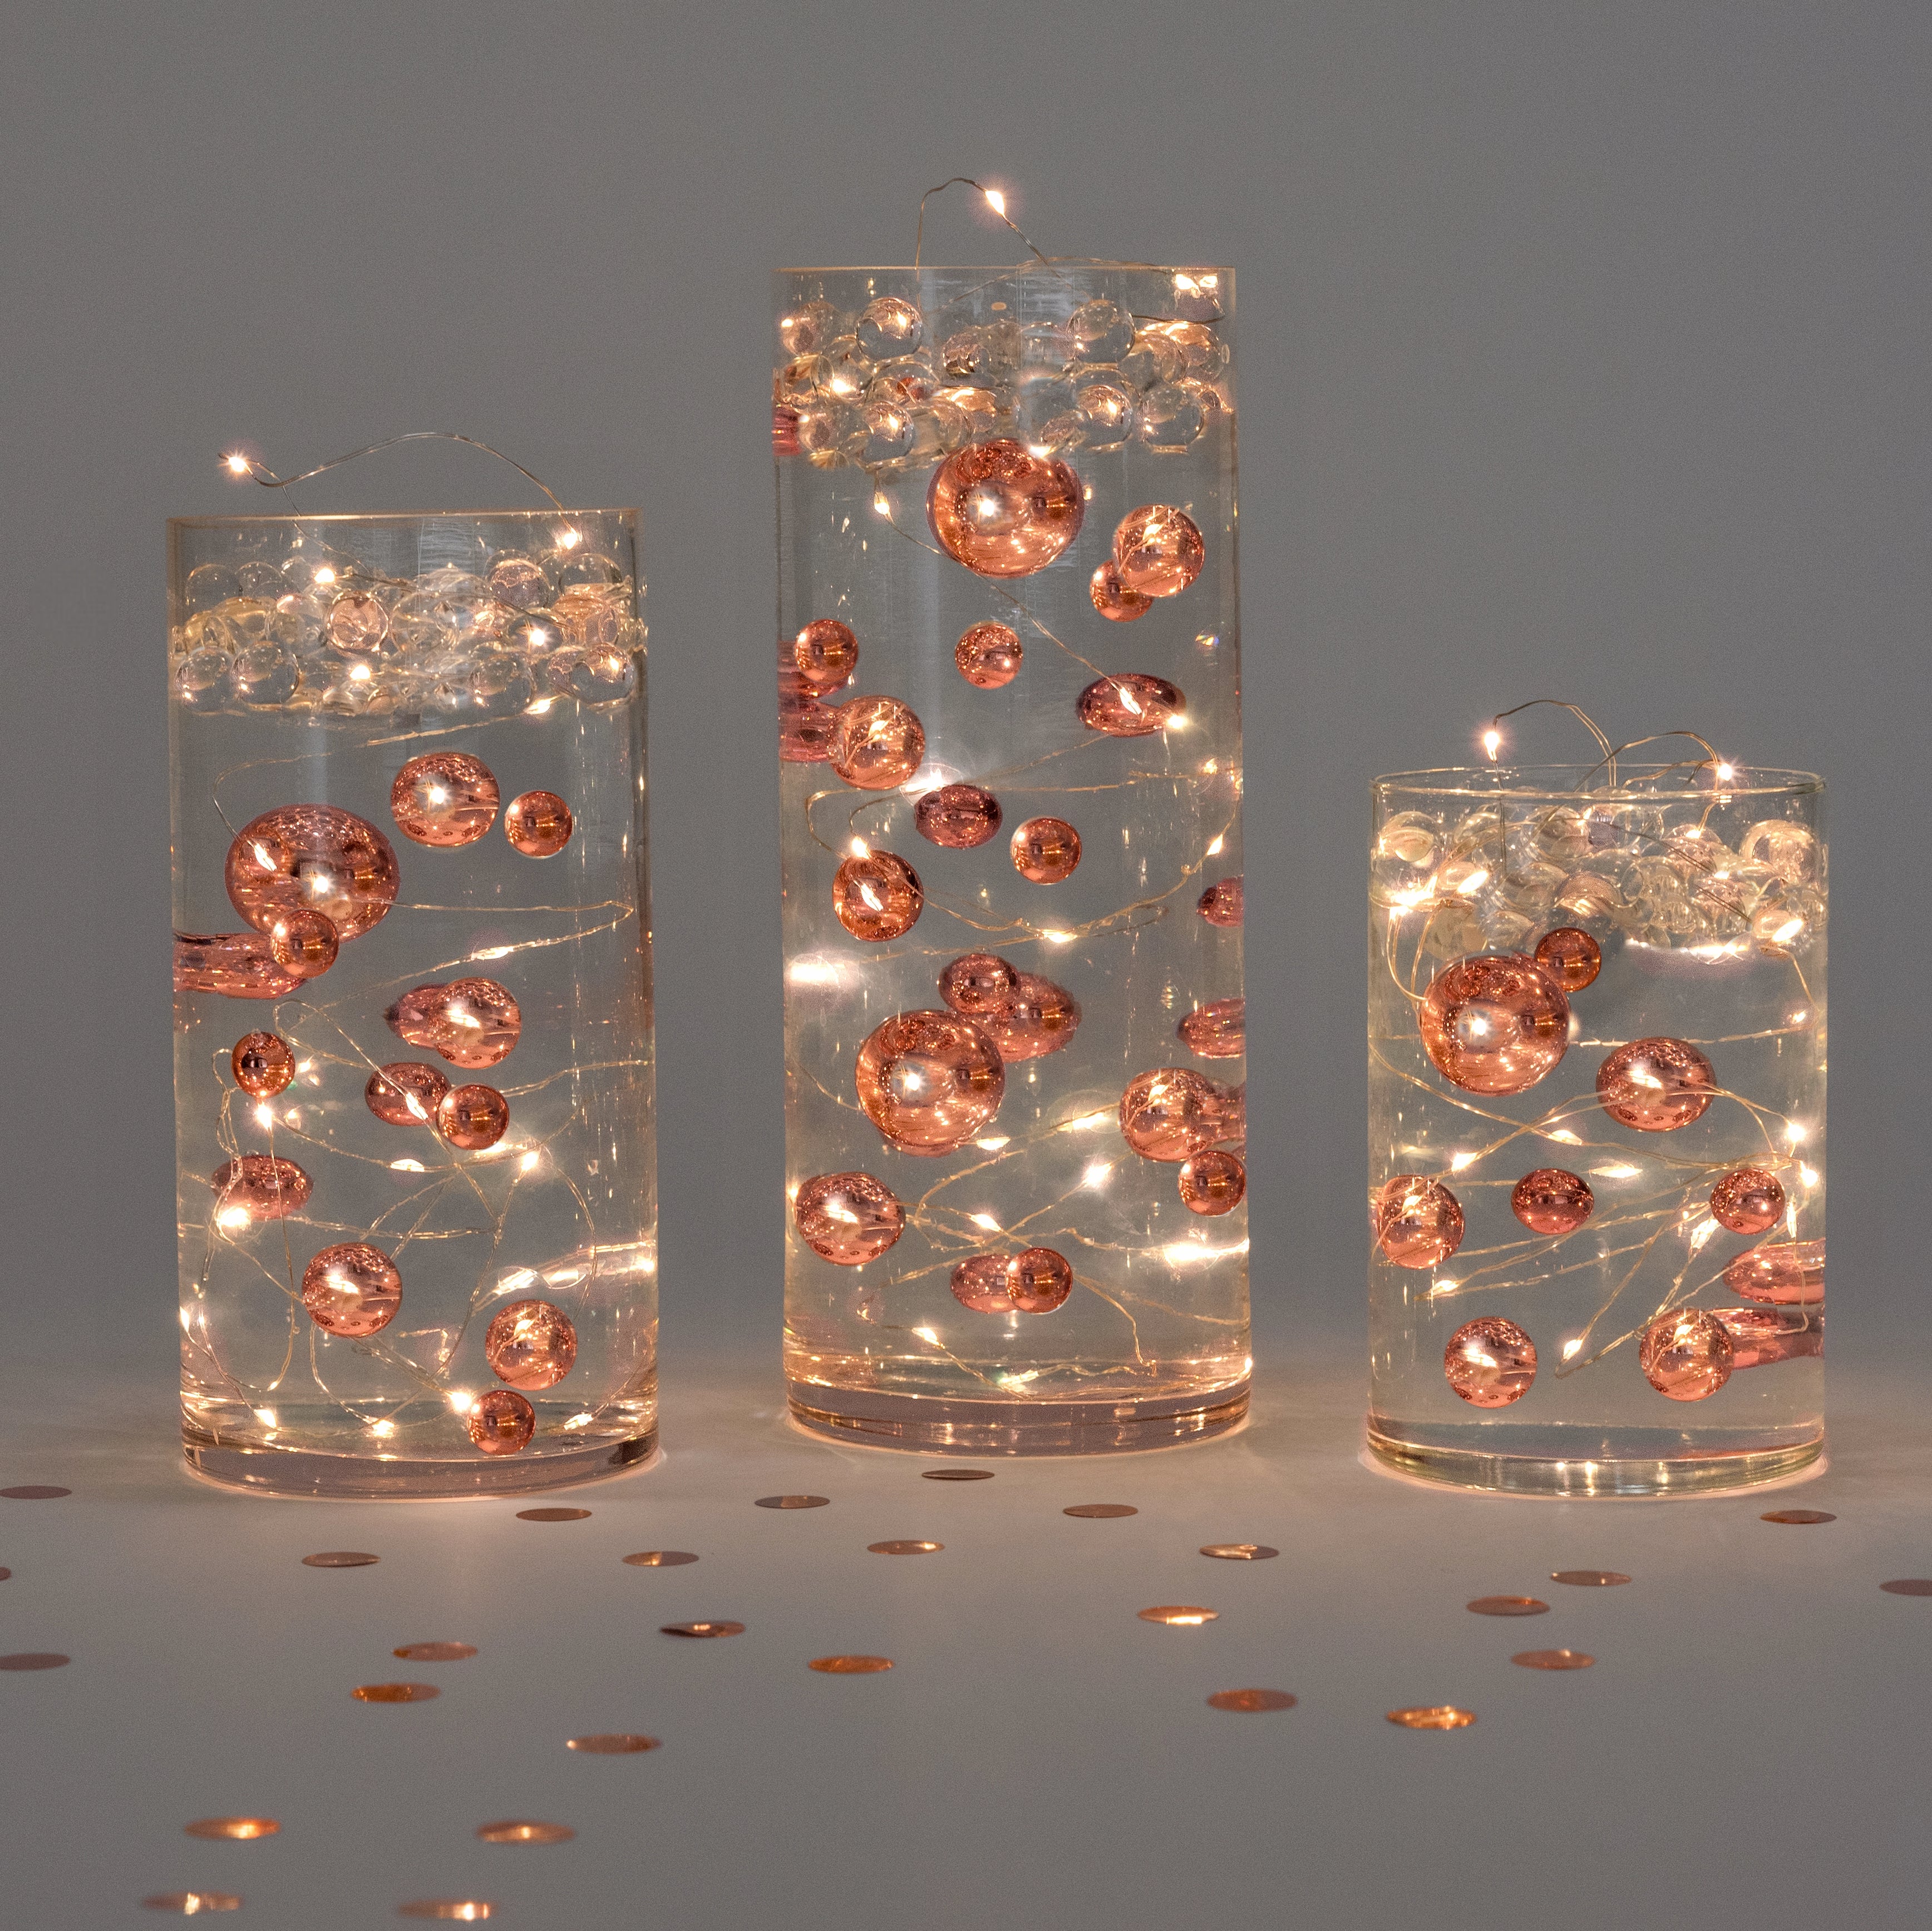 Floating Mini Wreaths for centerpieces – Floating Pearls